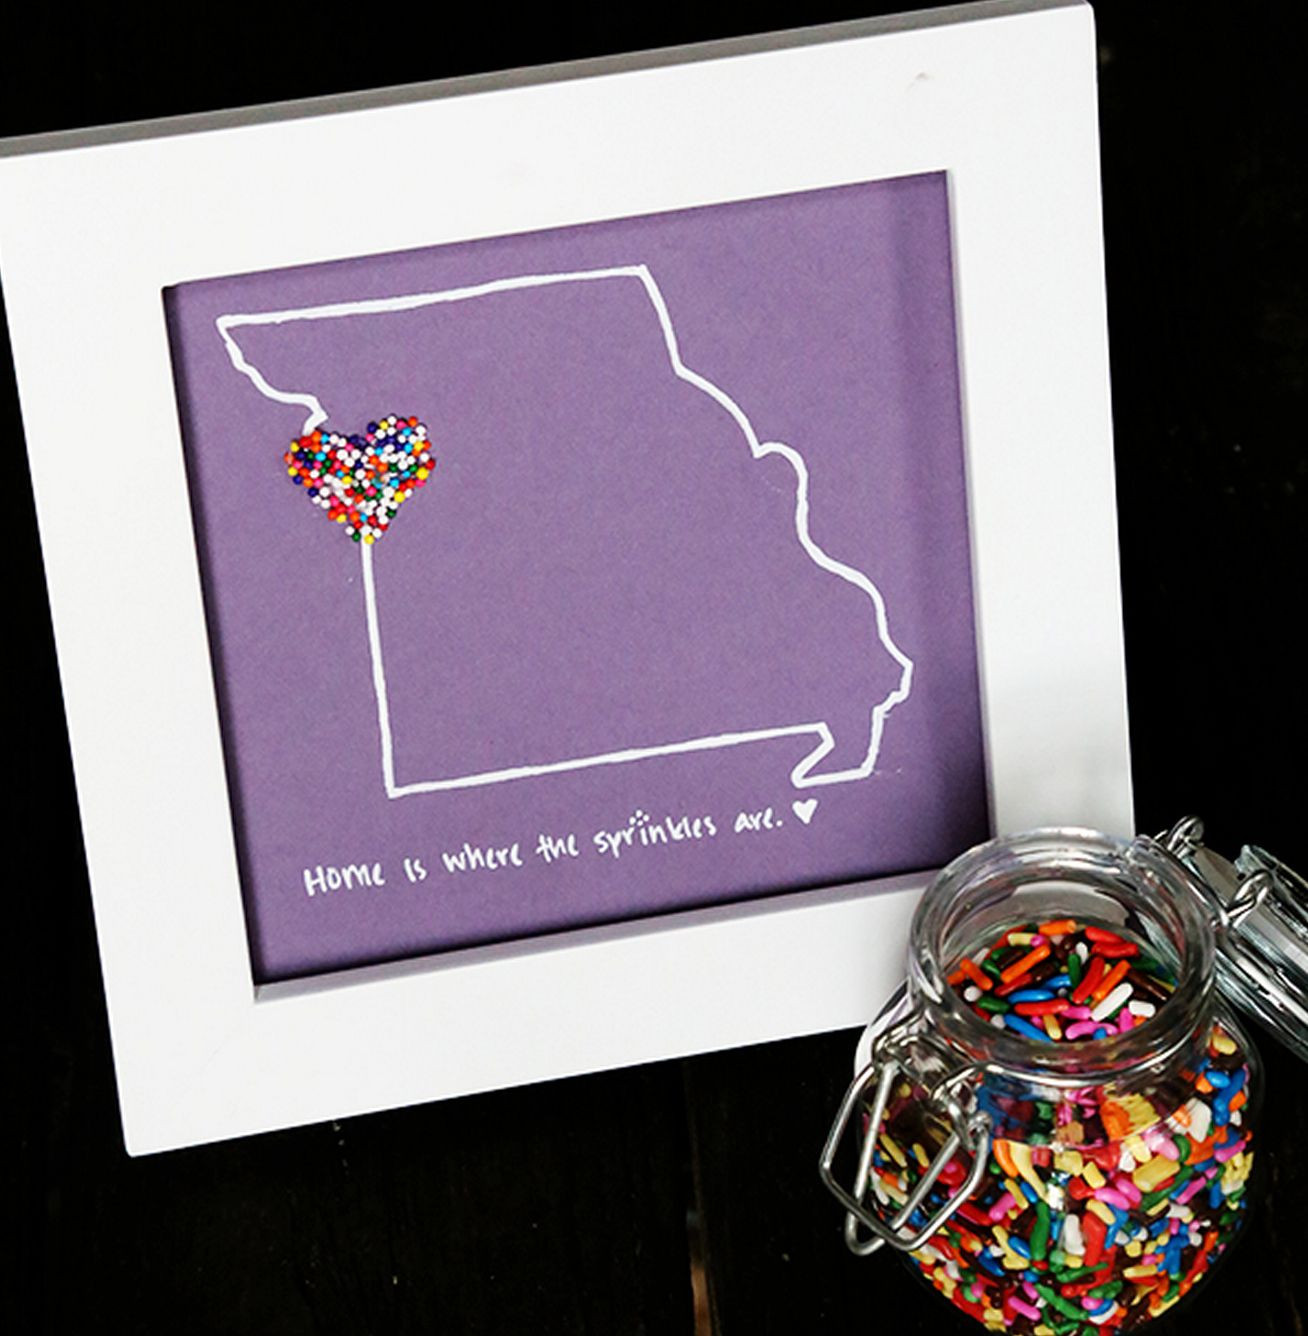 Graduation Gift Ideas For Friends
 DIY Sprinkles Art Top 5 DIY Presents To Make For a